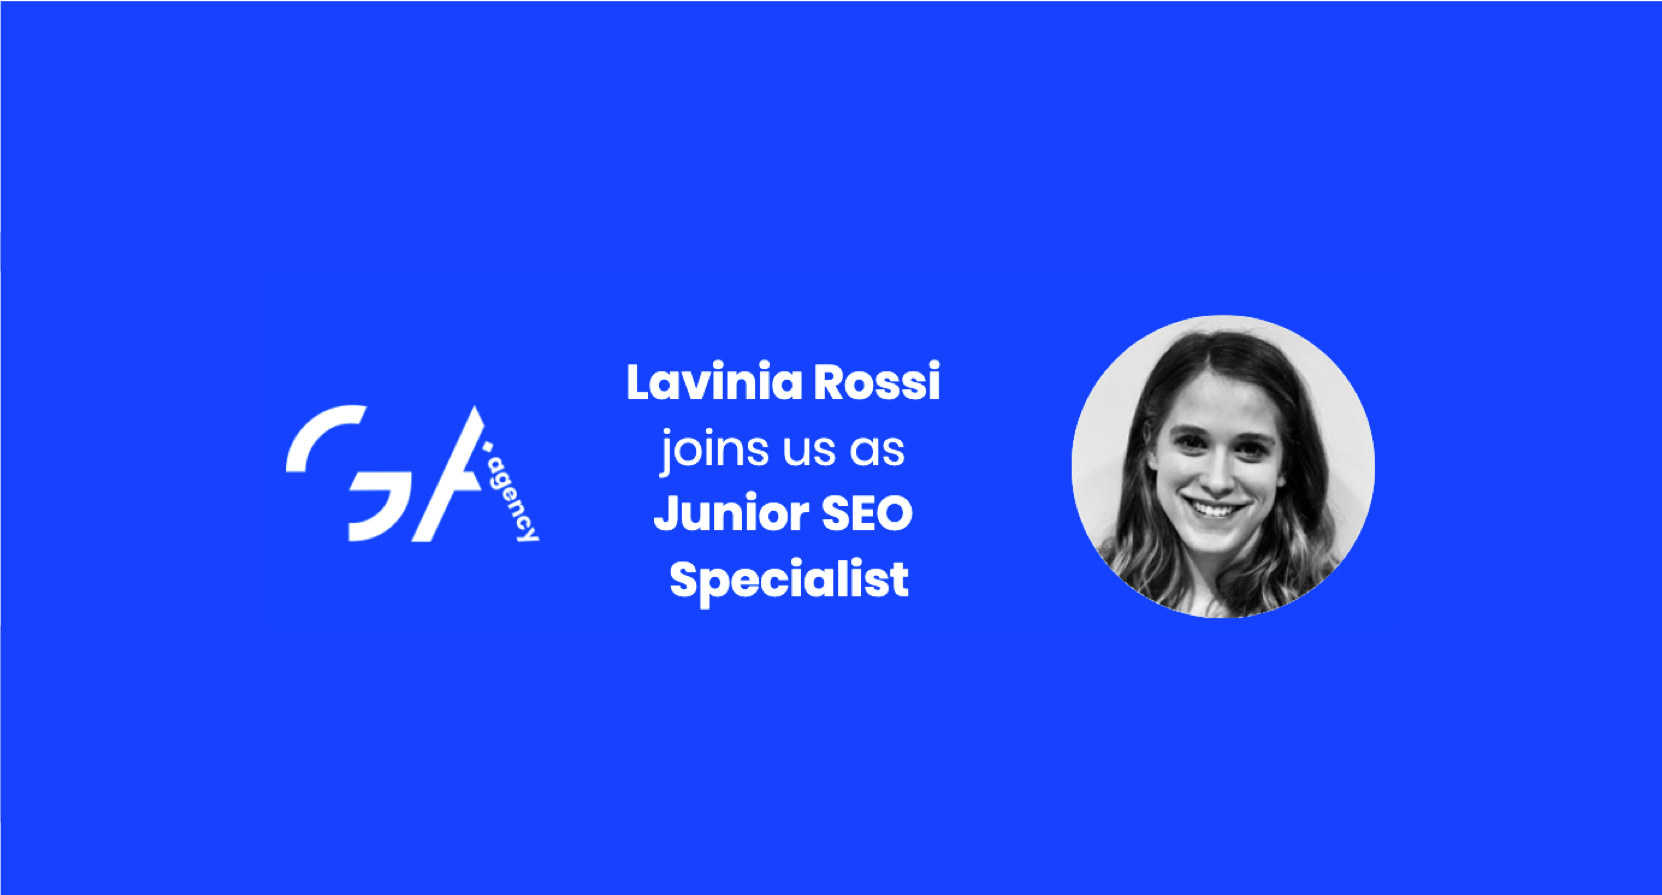 Welcome SEO Specialist Lavinia Rossi to GA Agency